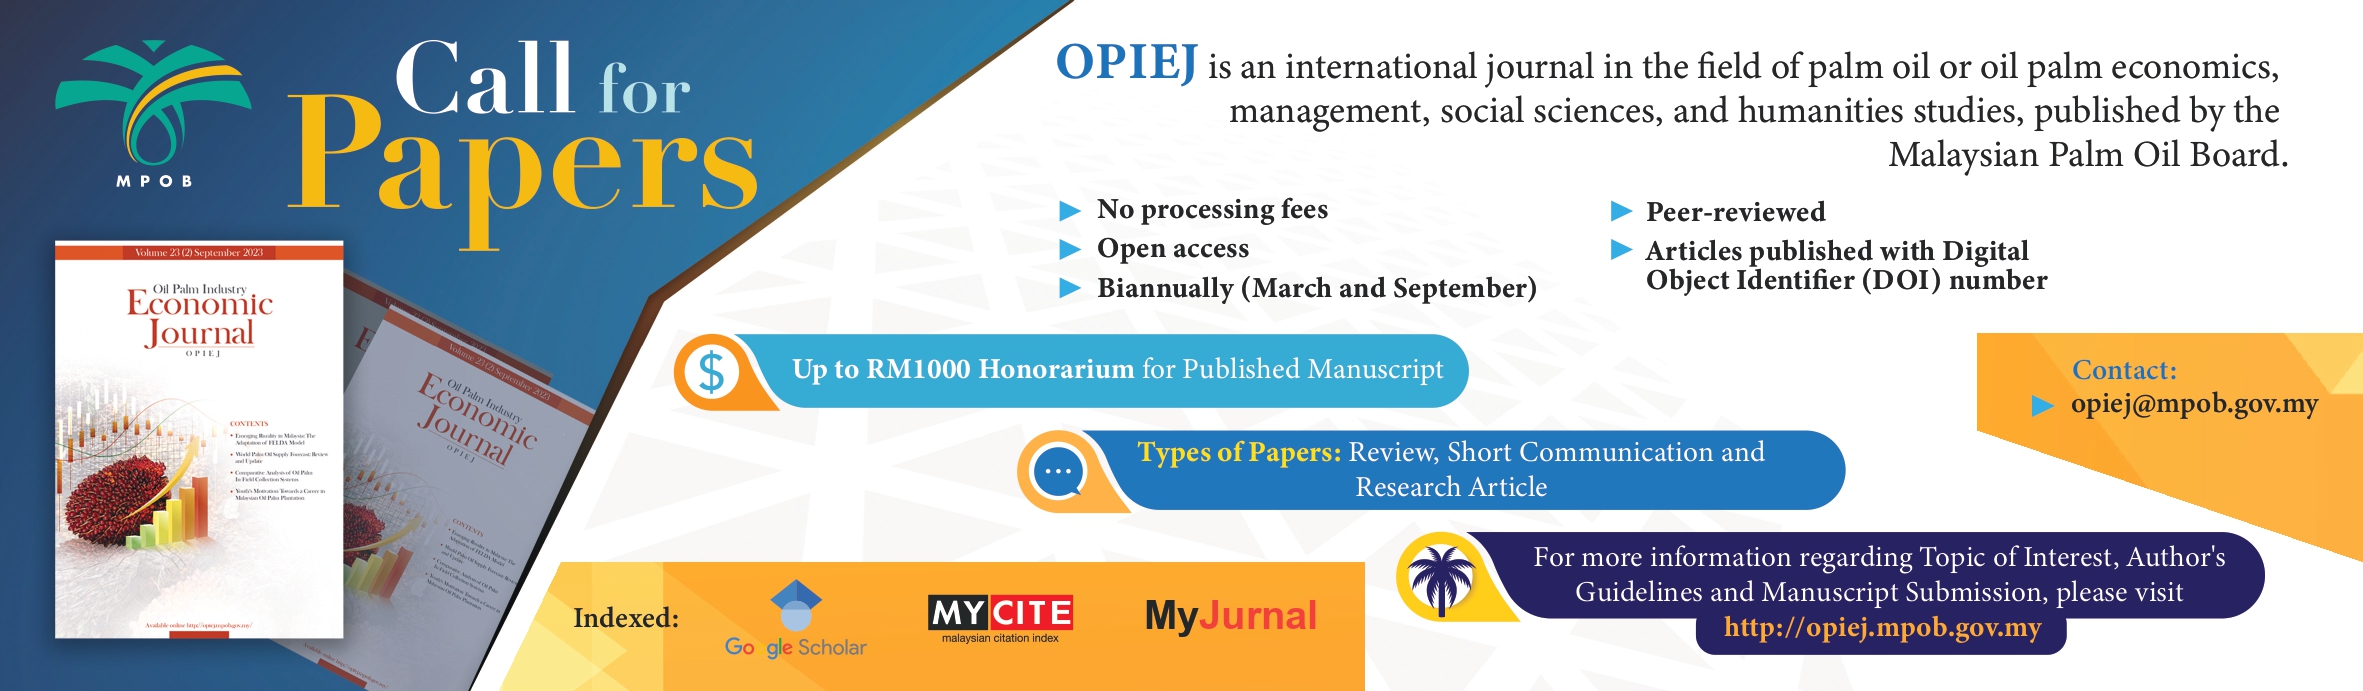 Call for Papers OPIEJ Dec